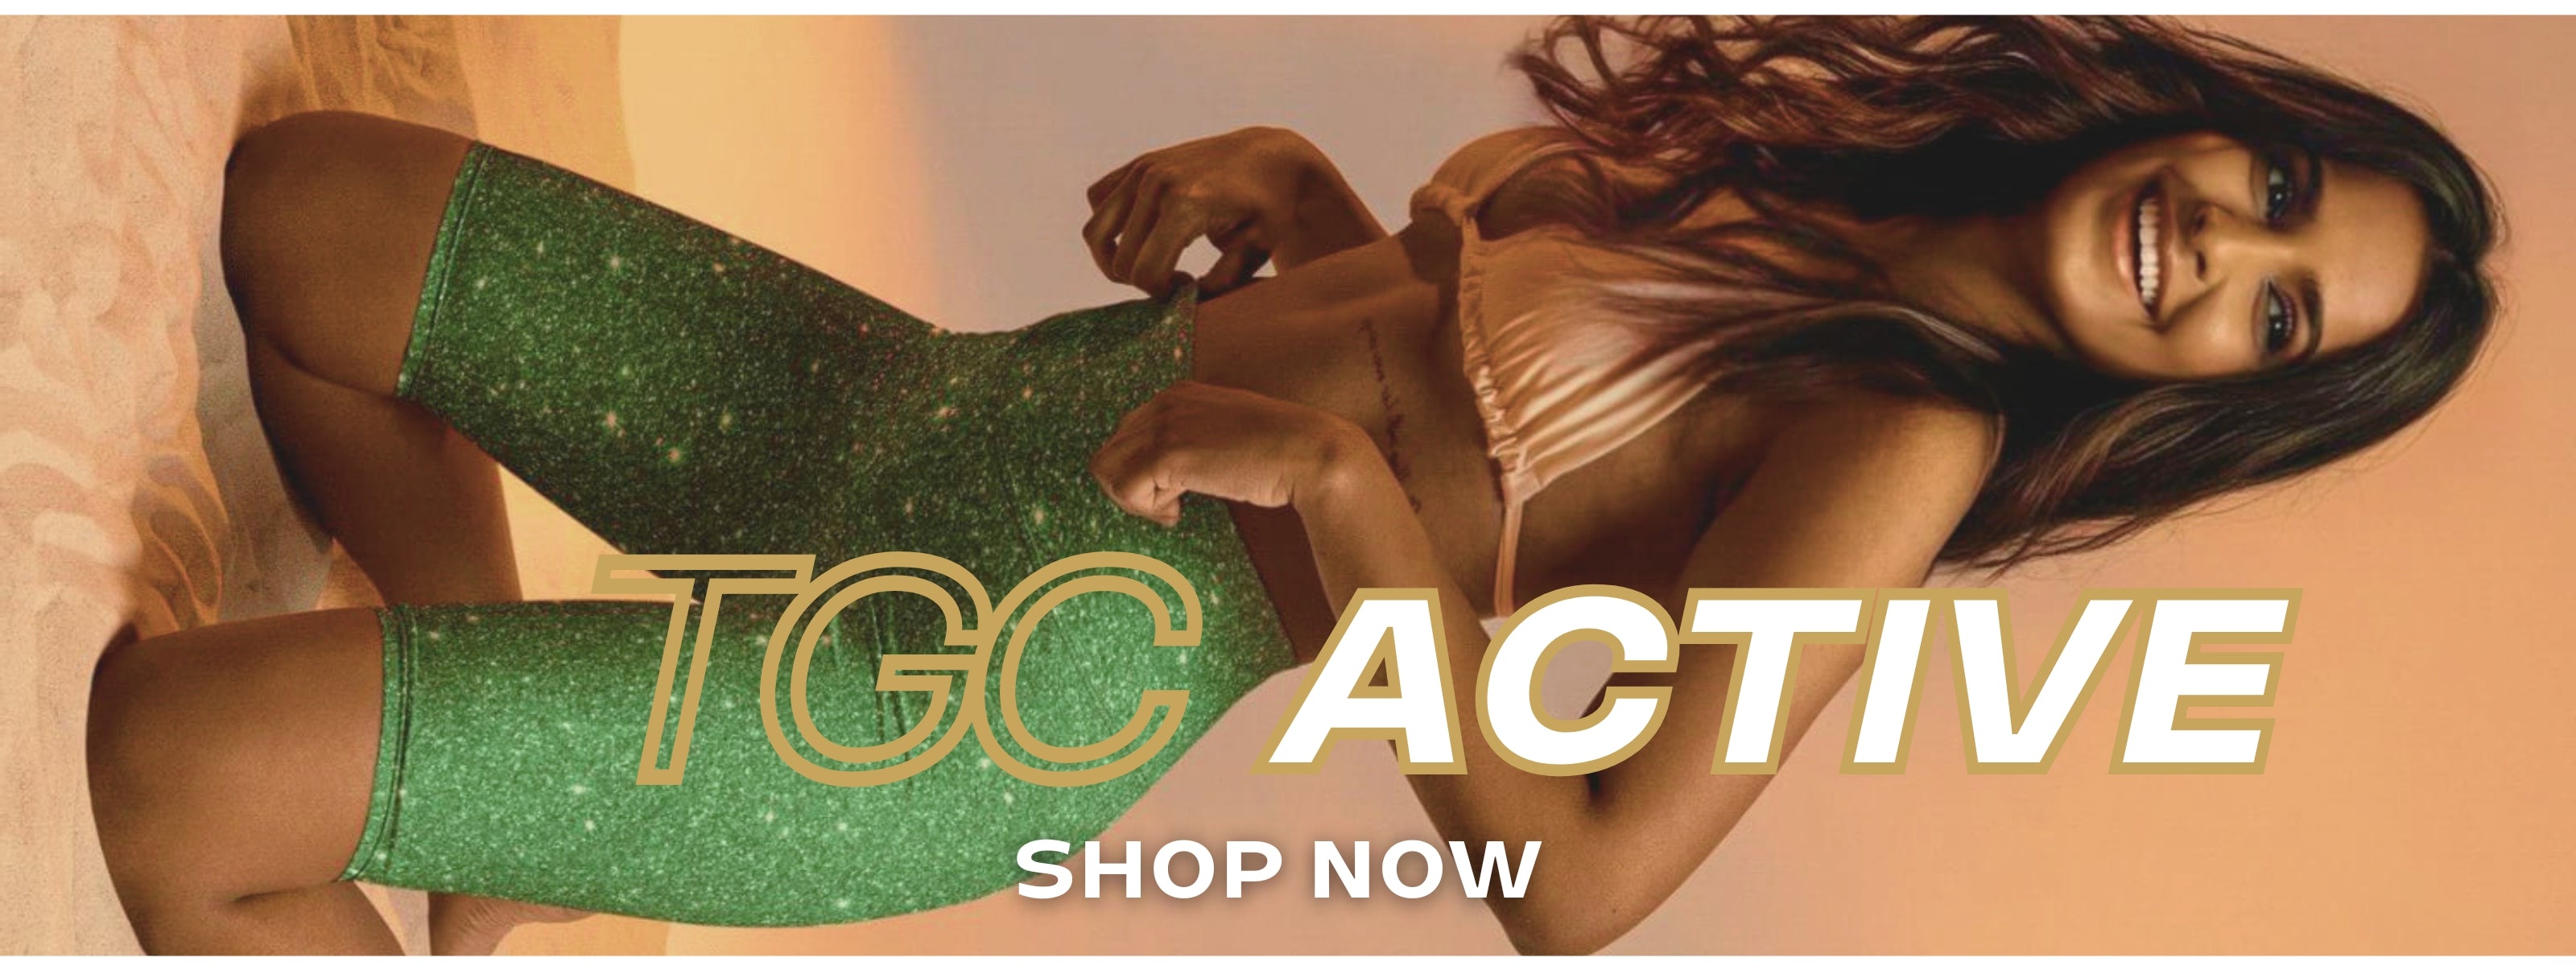 Model reclining in green glitter leggings with "TGC ACTIVE" branding and a "SHOP NOW" call-to-action.